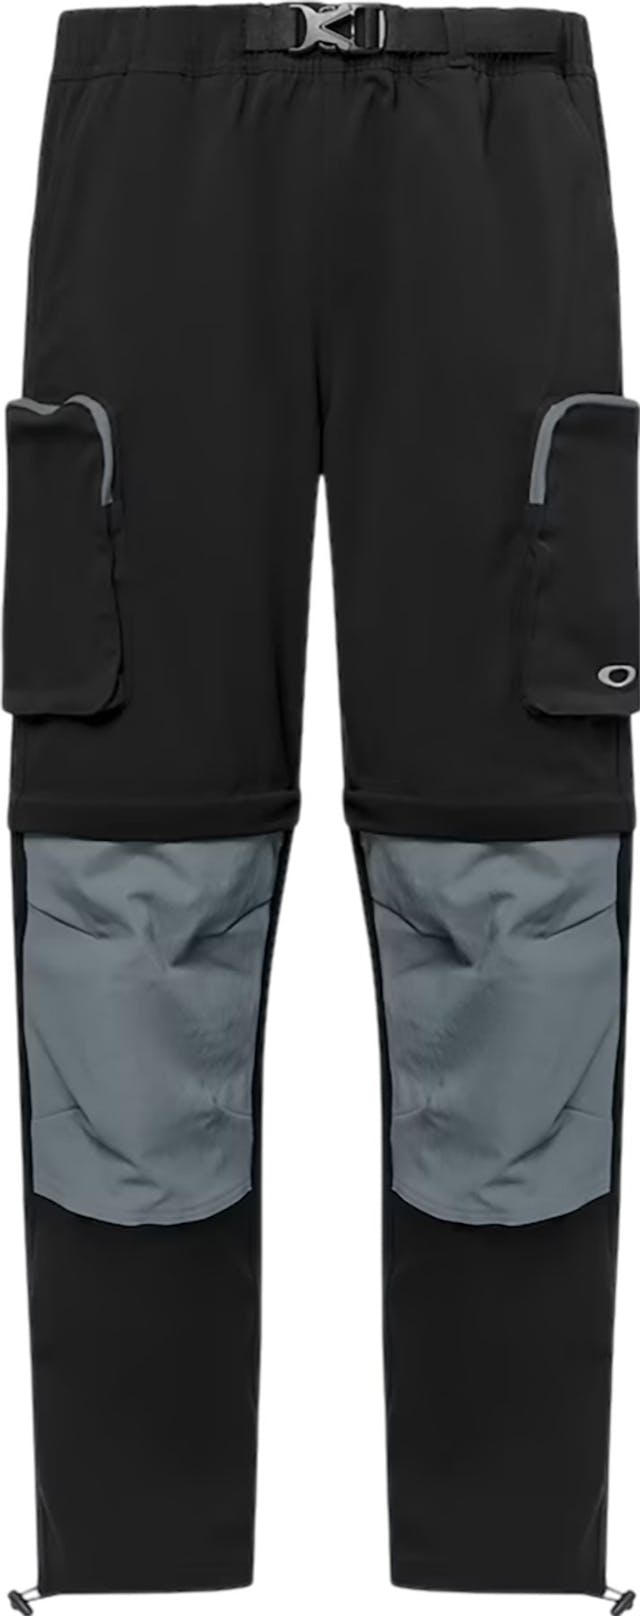 Product image for Latitude Convertible Pant - Men's